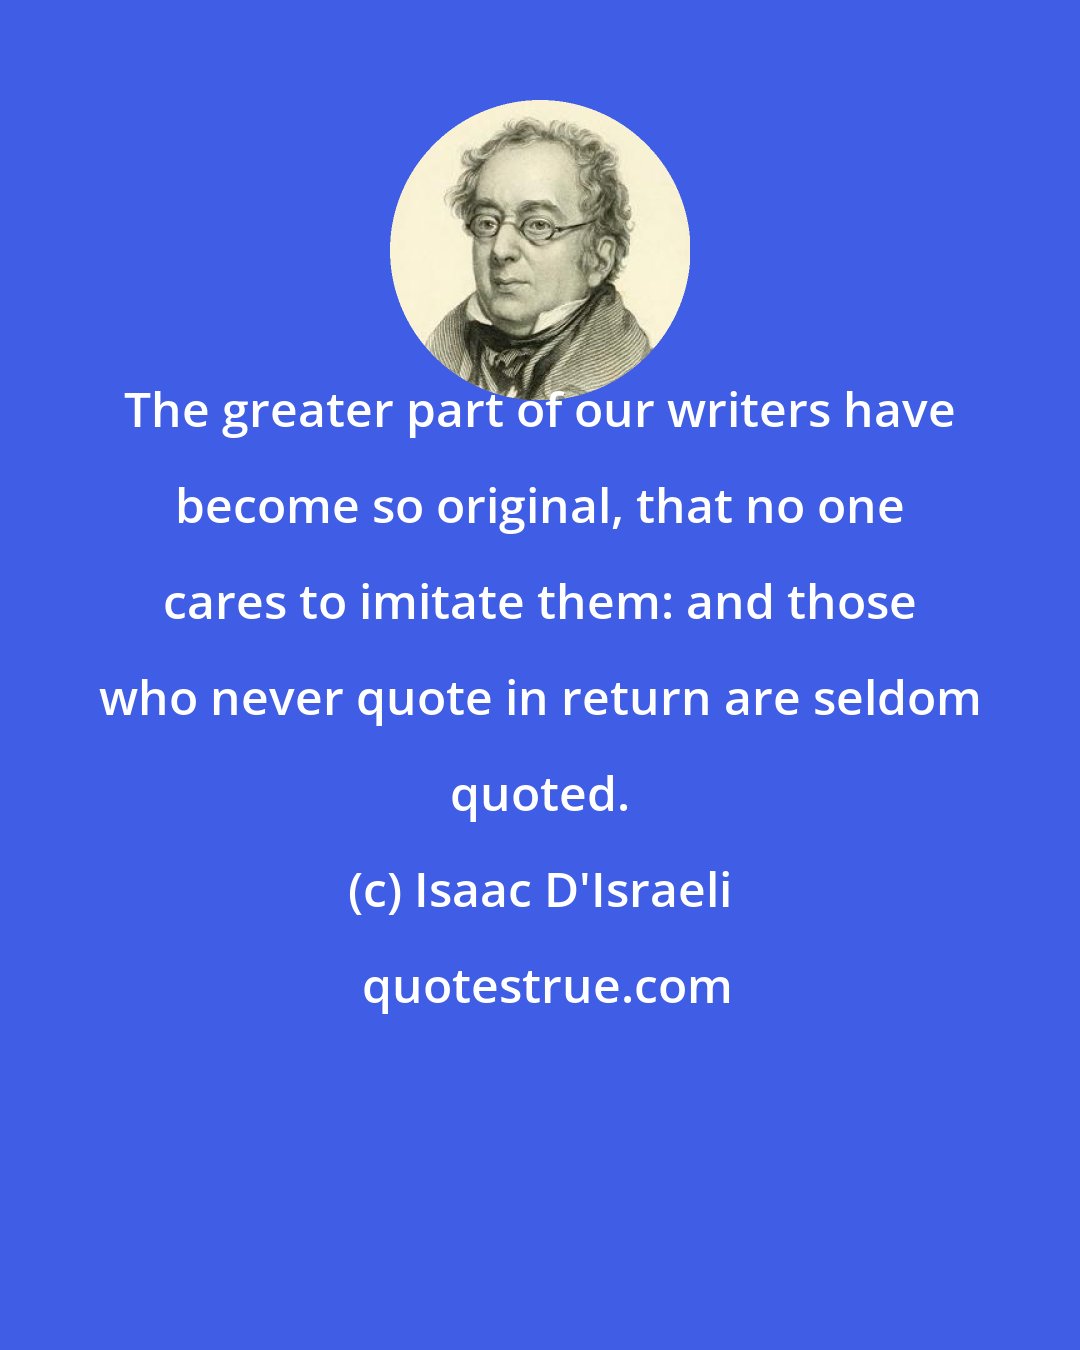 Isaac D'Israeli: The greater part of our writers have become so original, that no one cares to imitate them: and those who never quote in return are seldom quoted.